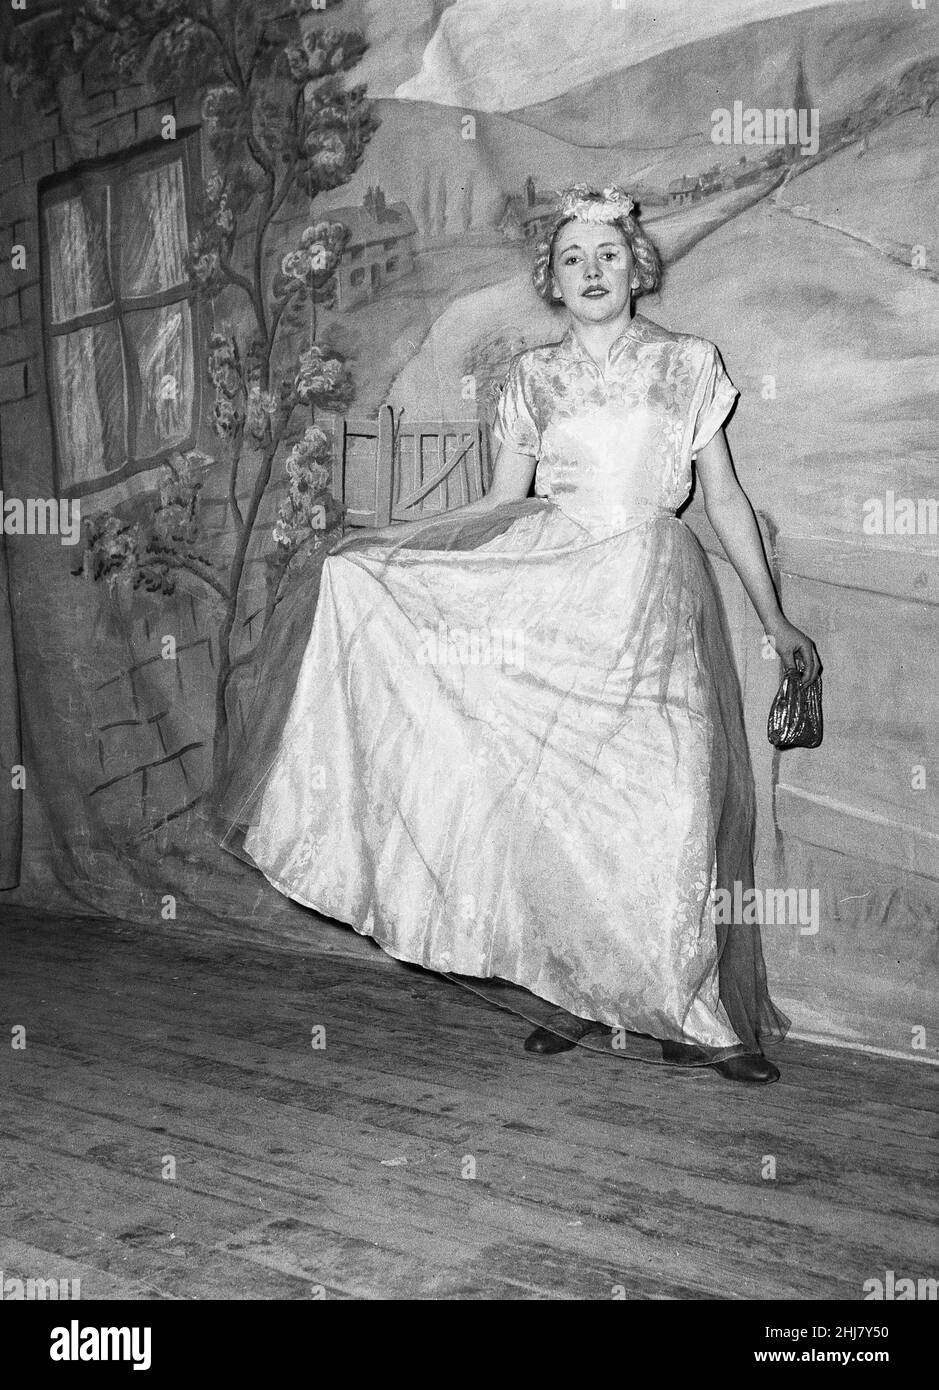 1956, historical, Jack and the Beanstalk, teenage girl on the stage in her costume appearing in an amateur theatrical production of Jack and the Beanstalk, a famous old English folk tale or fable, England, UK. England, UK. Stock Photo